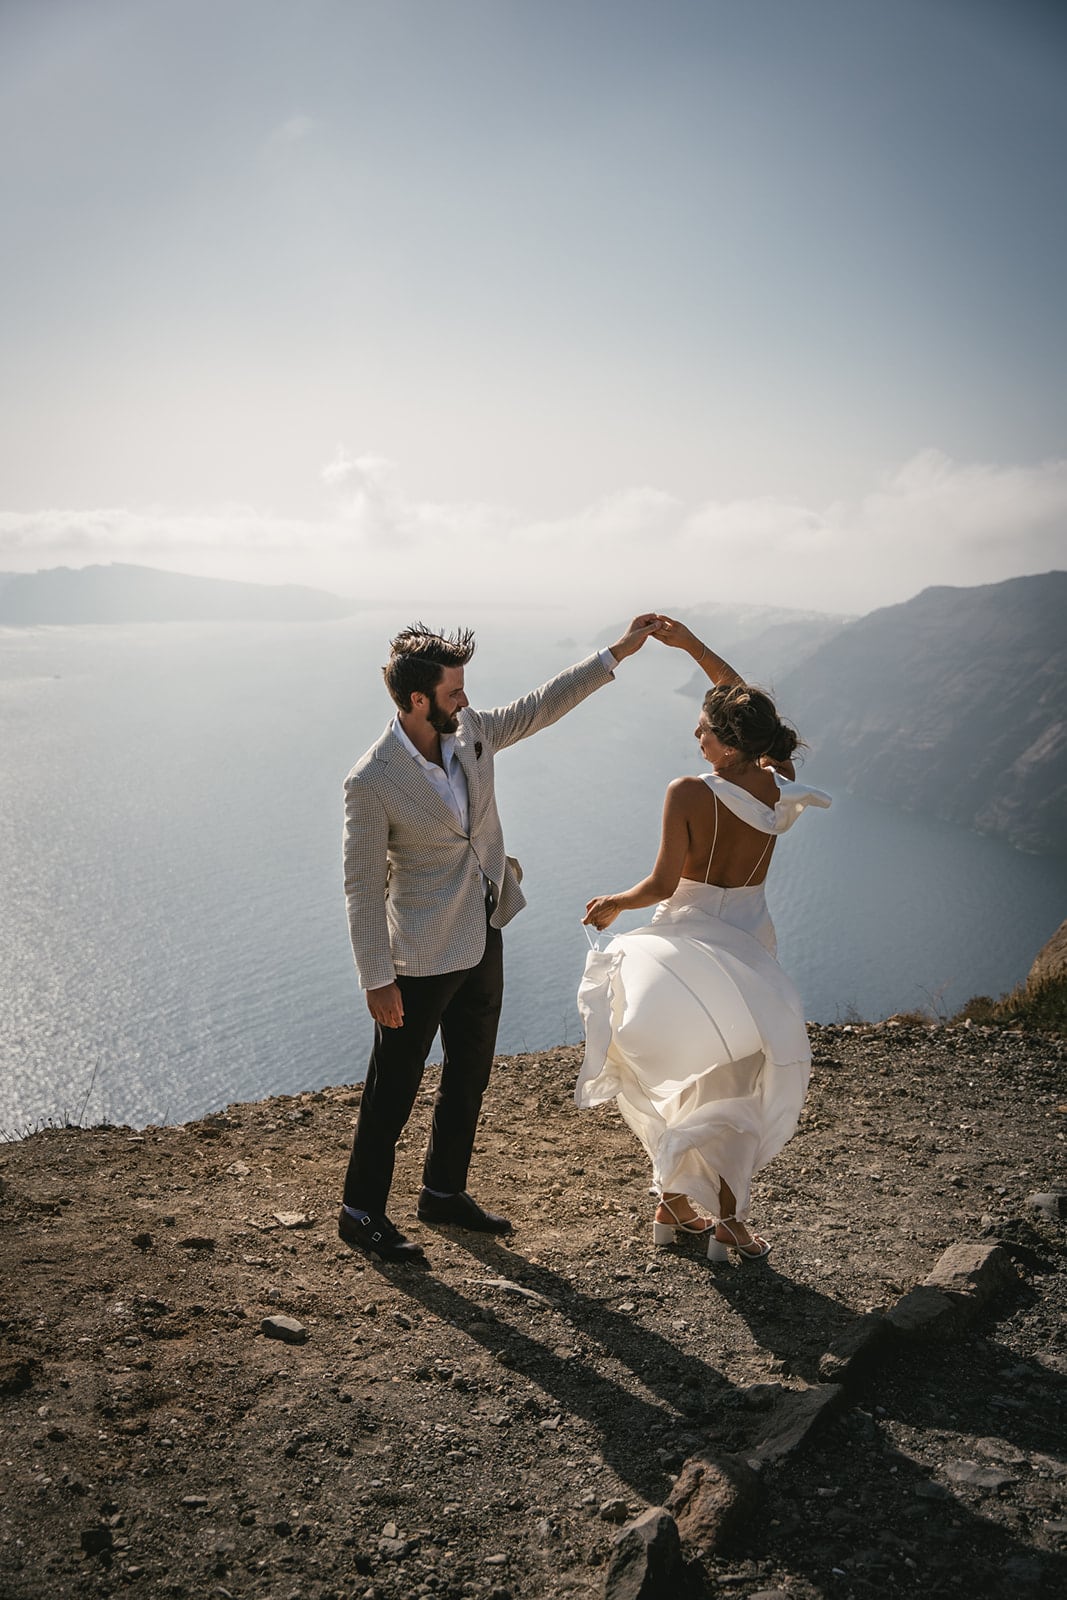 Entwined in a dance as the sea watches, their love story becomes a part of Santorini’s magic